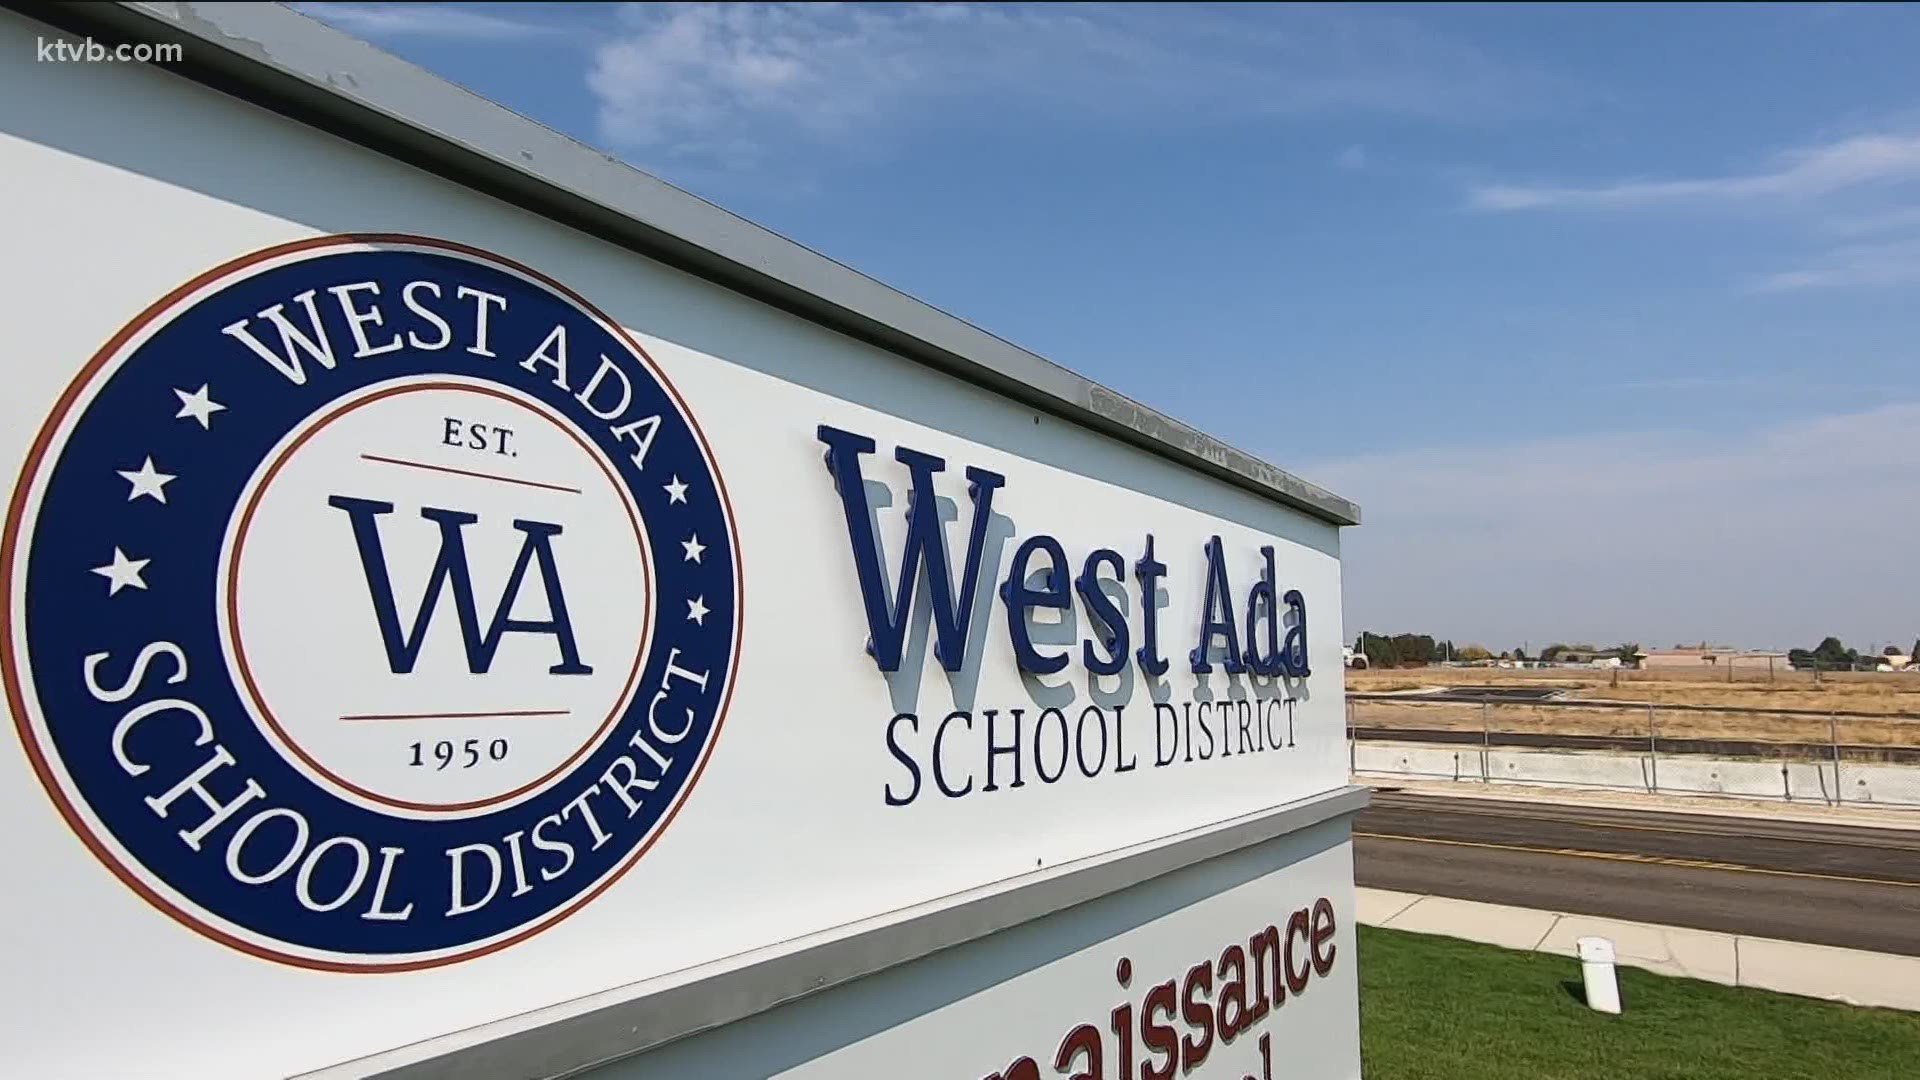 As students in the West Ada School District prepare to stay home for a second day, progress may be made in revising safety protocols.